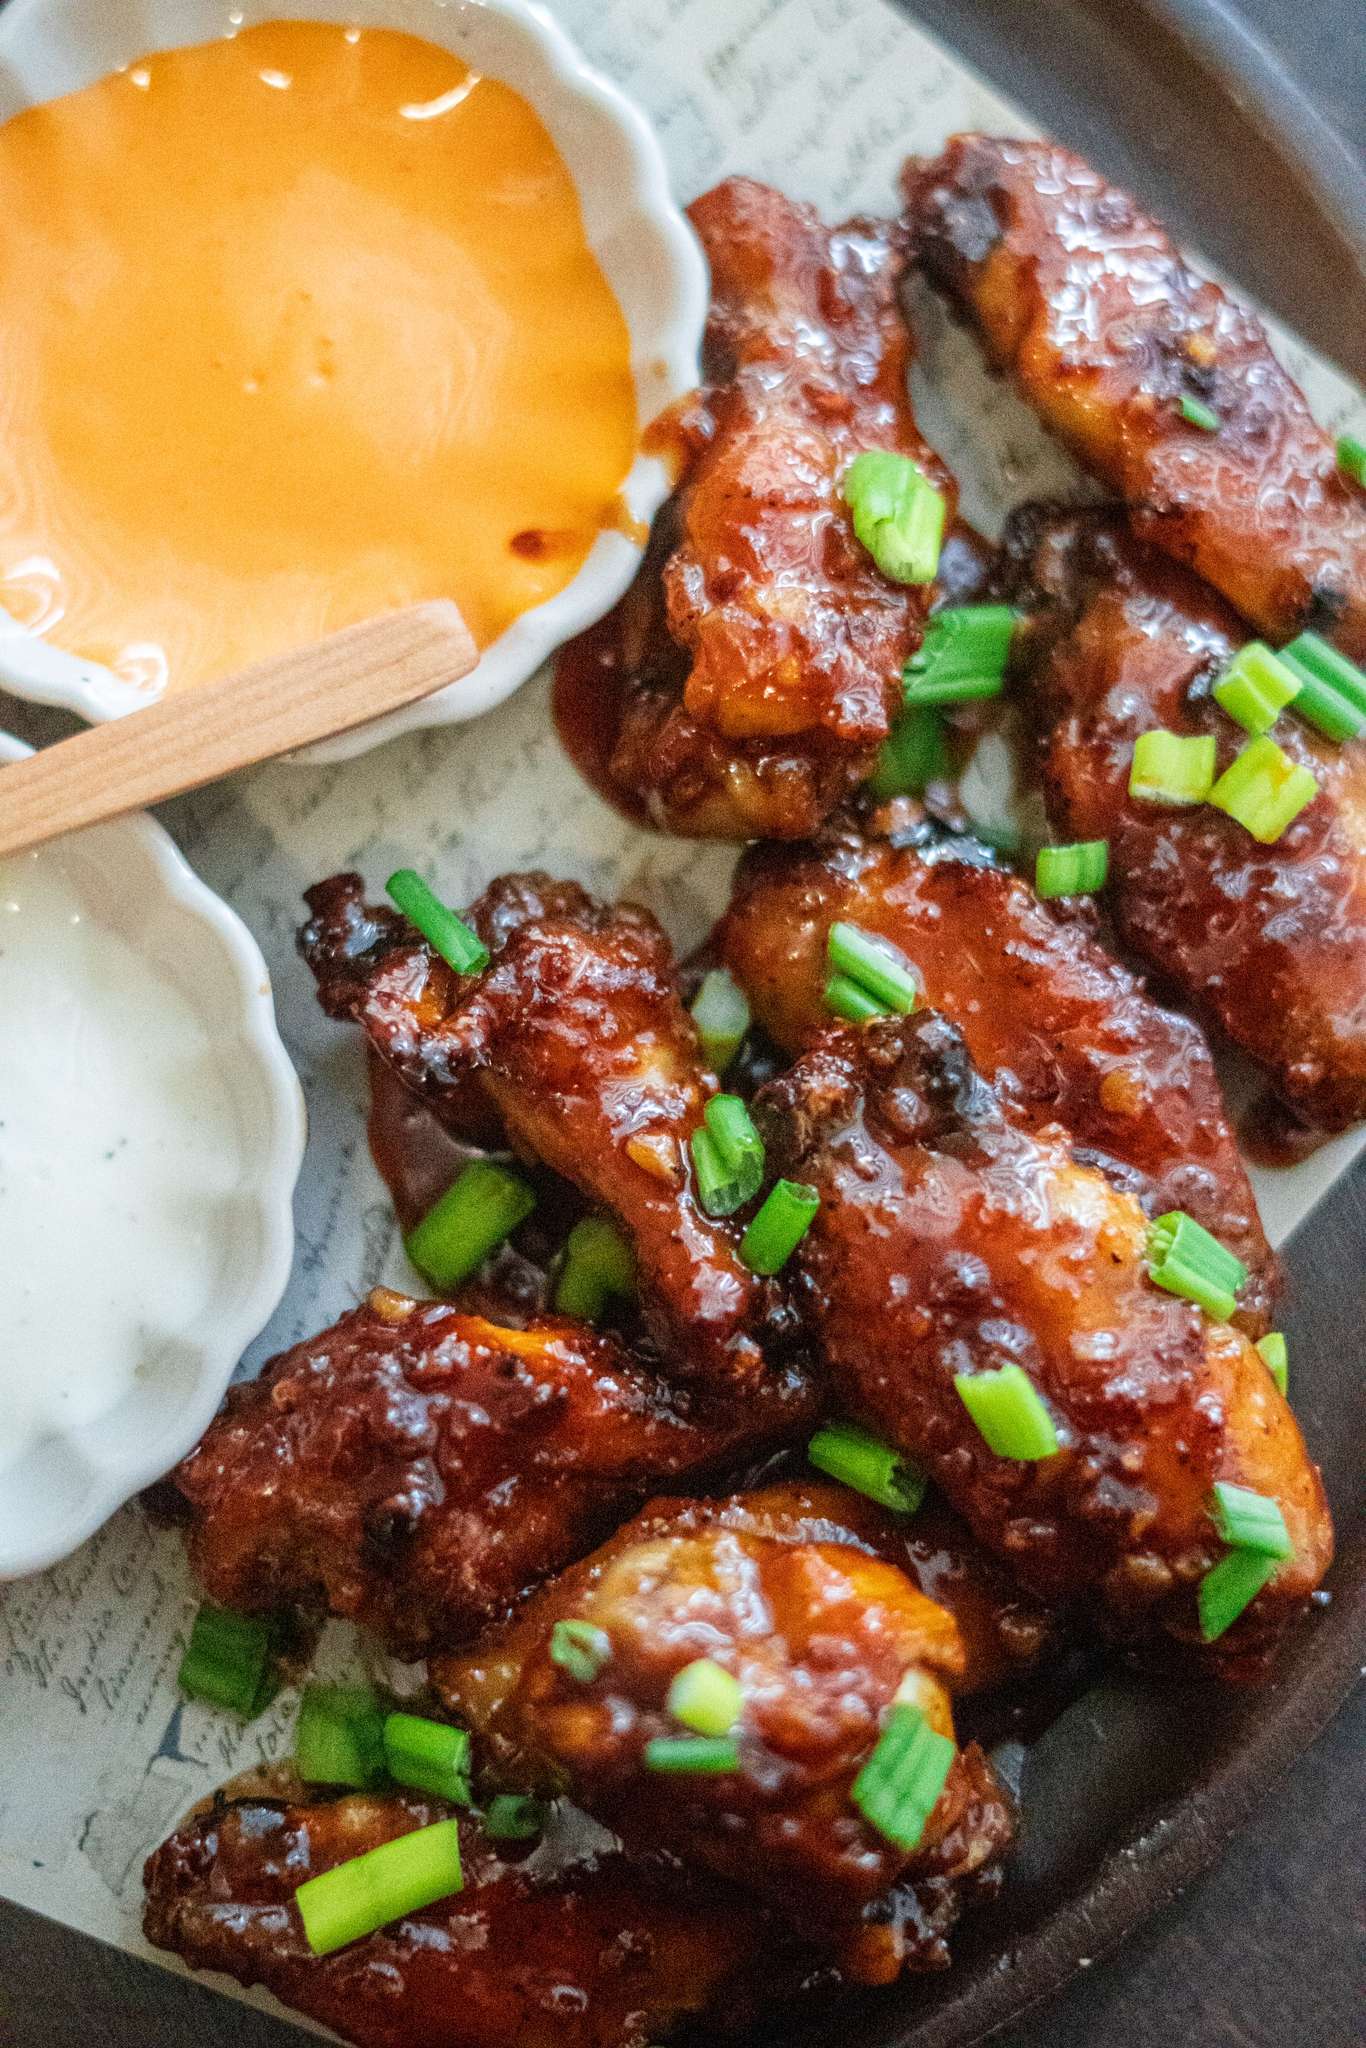 A plate of honey garlic siracha wings topped with fresh spring onions and served with a side of sauces.